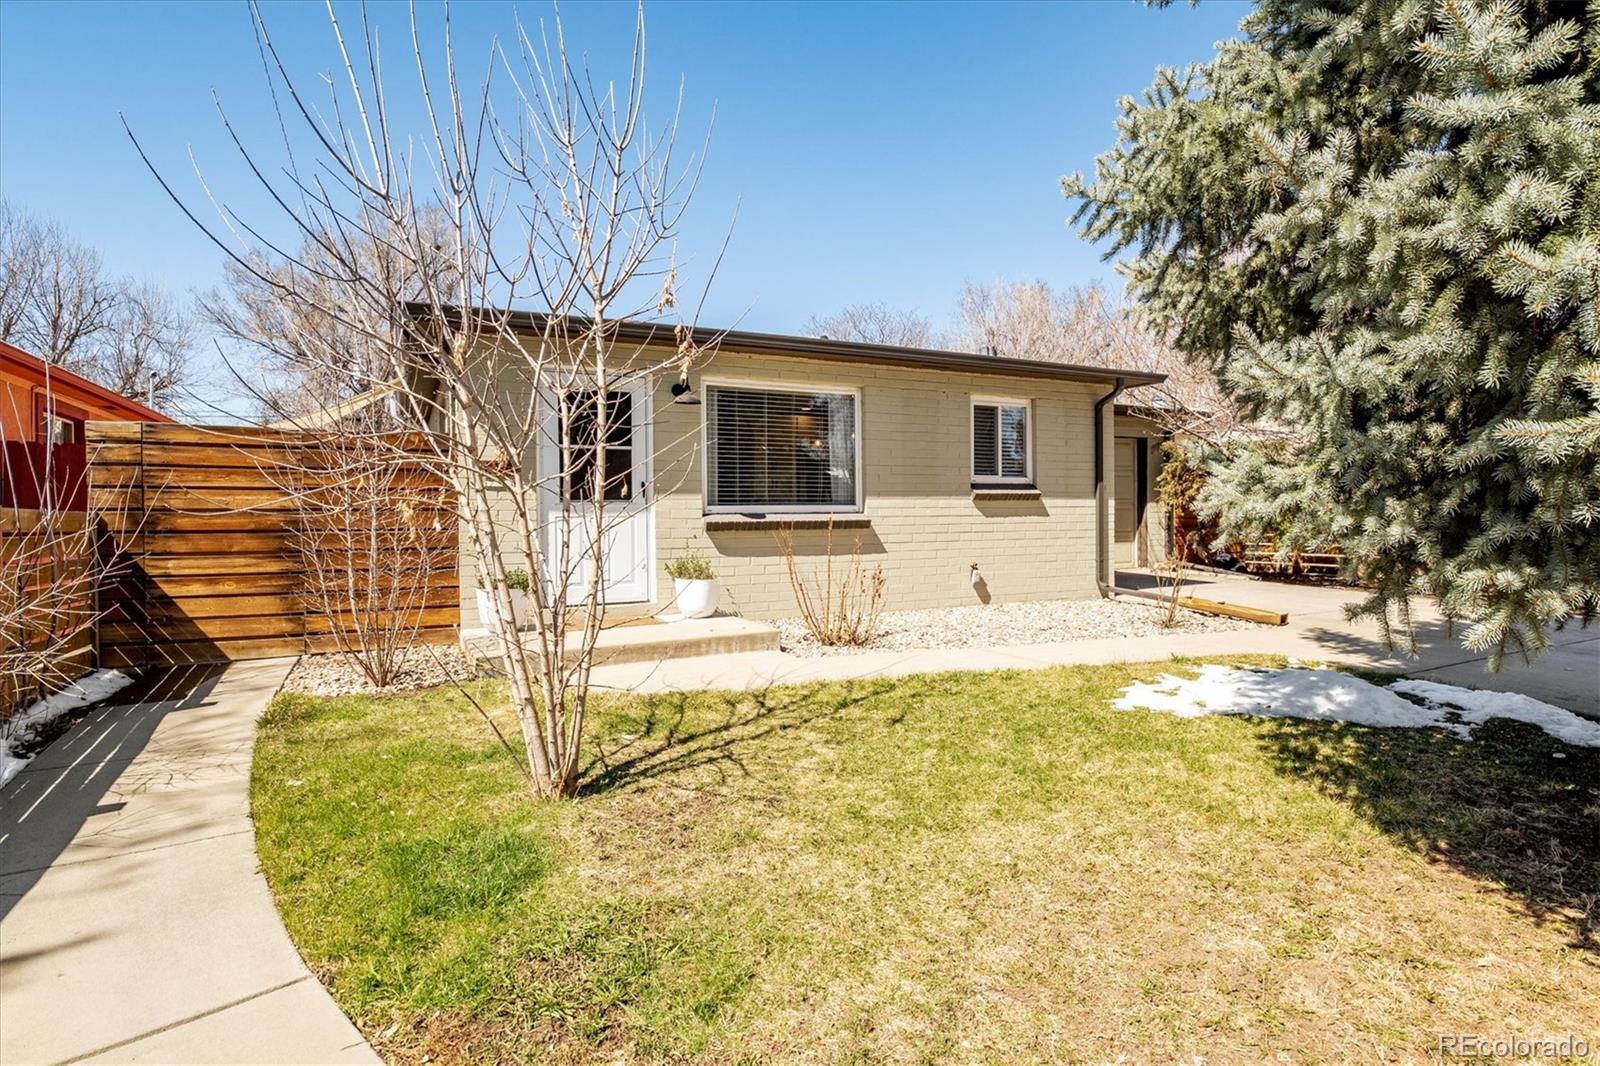 535  vrain street, Denver sold home. Closed on 2024-04-19 for $510,000.